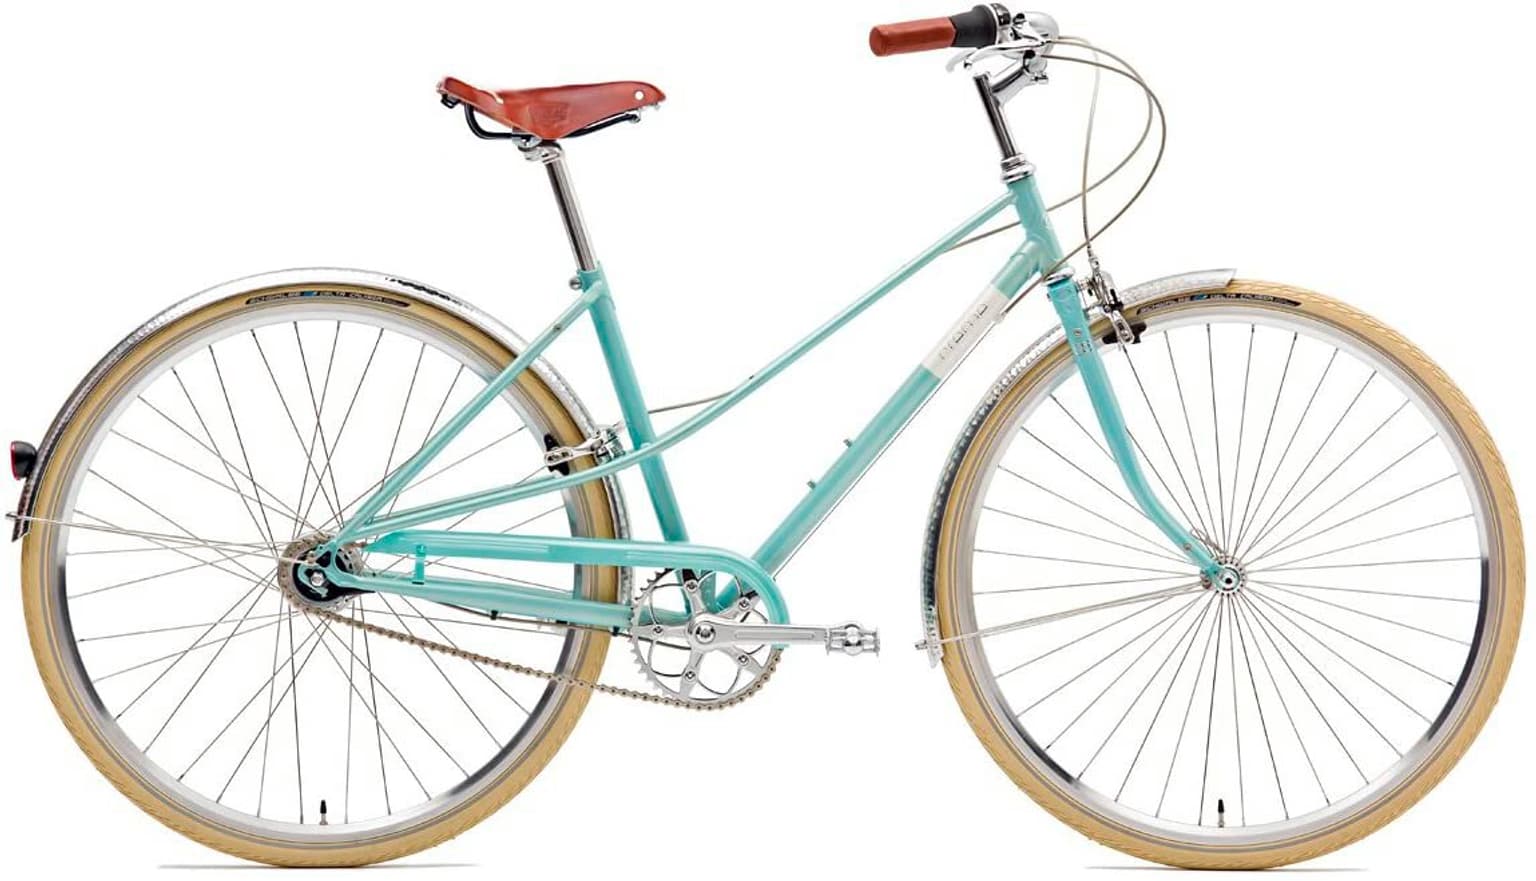 Creme Creme Caferacer Solo Citybike turquoise-claire 1